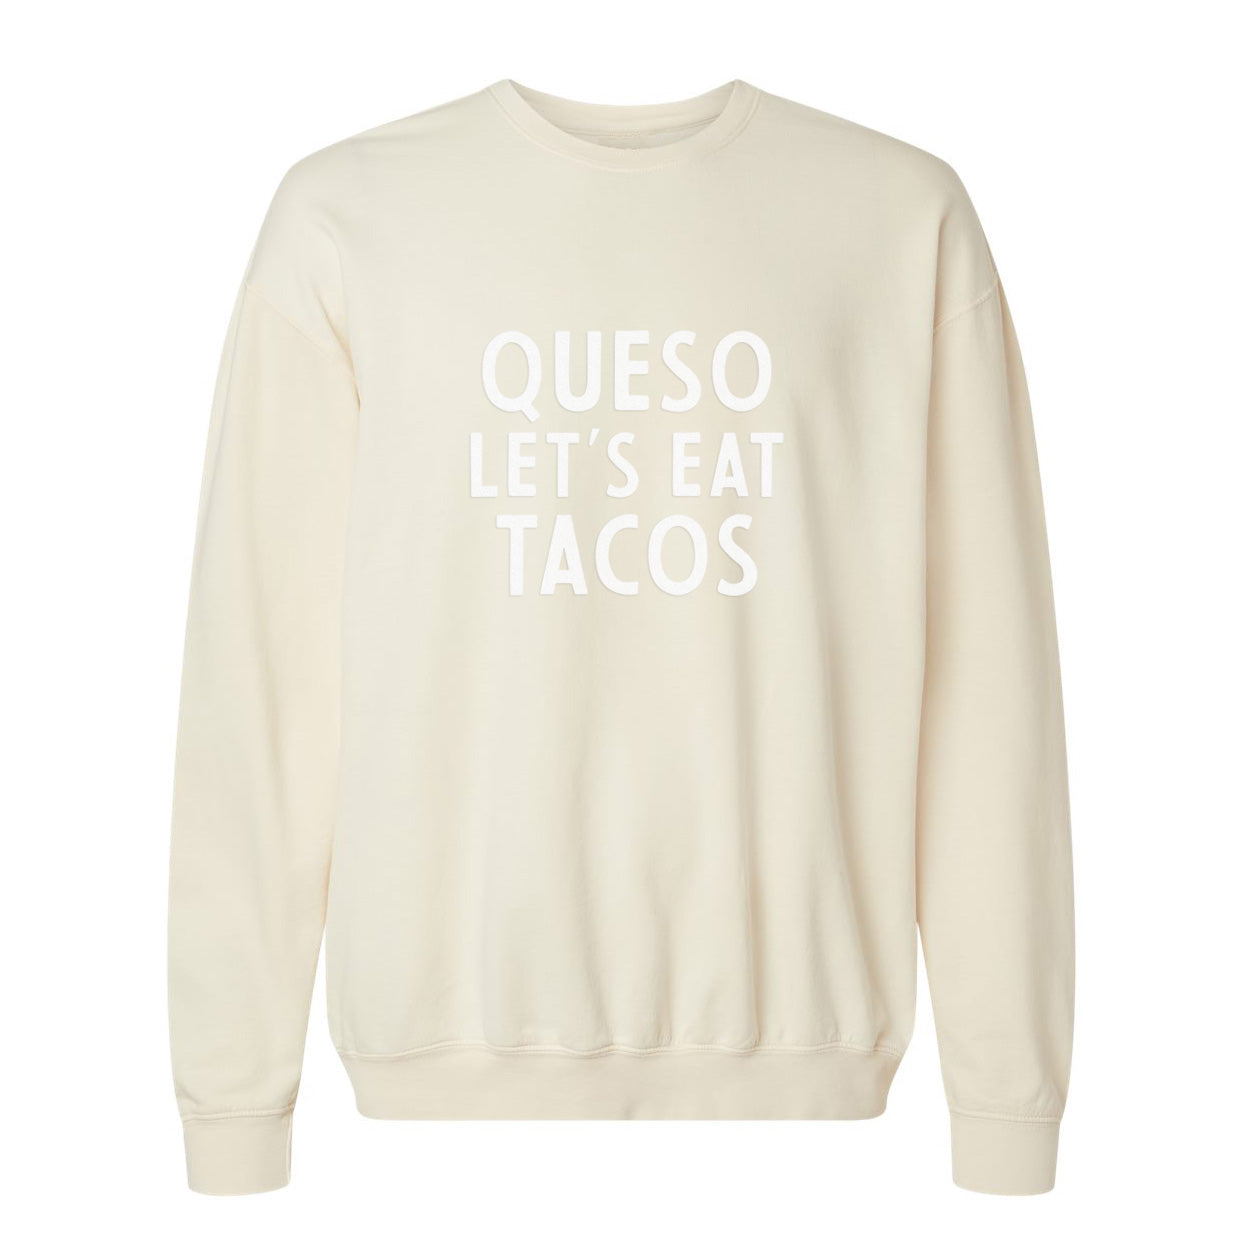 Queso Let's Eat Tacos Washed Sweatshirt